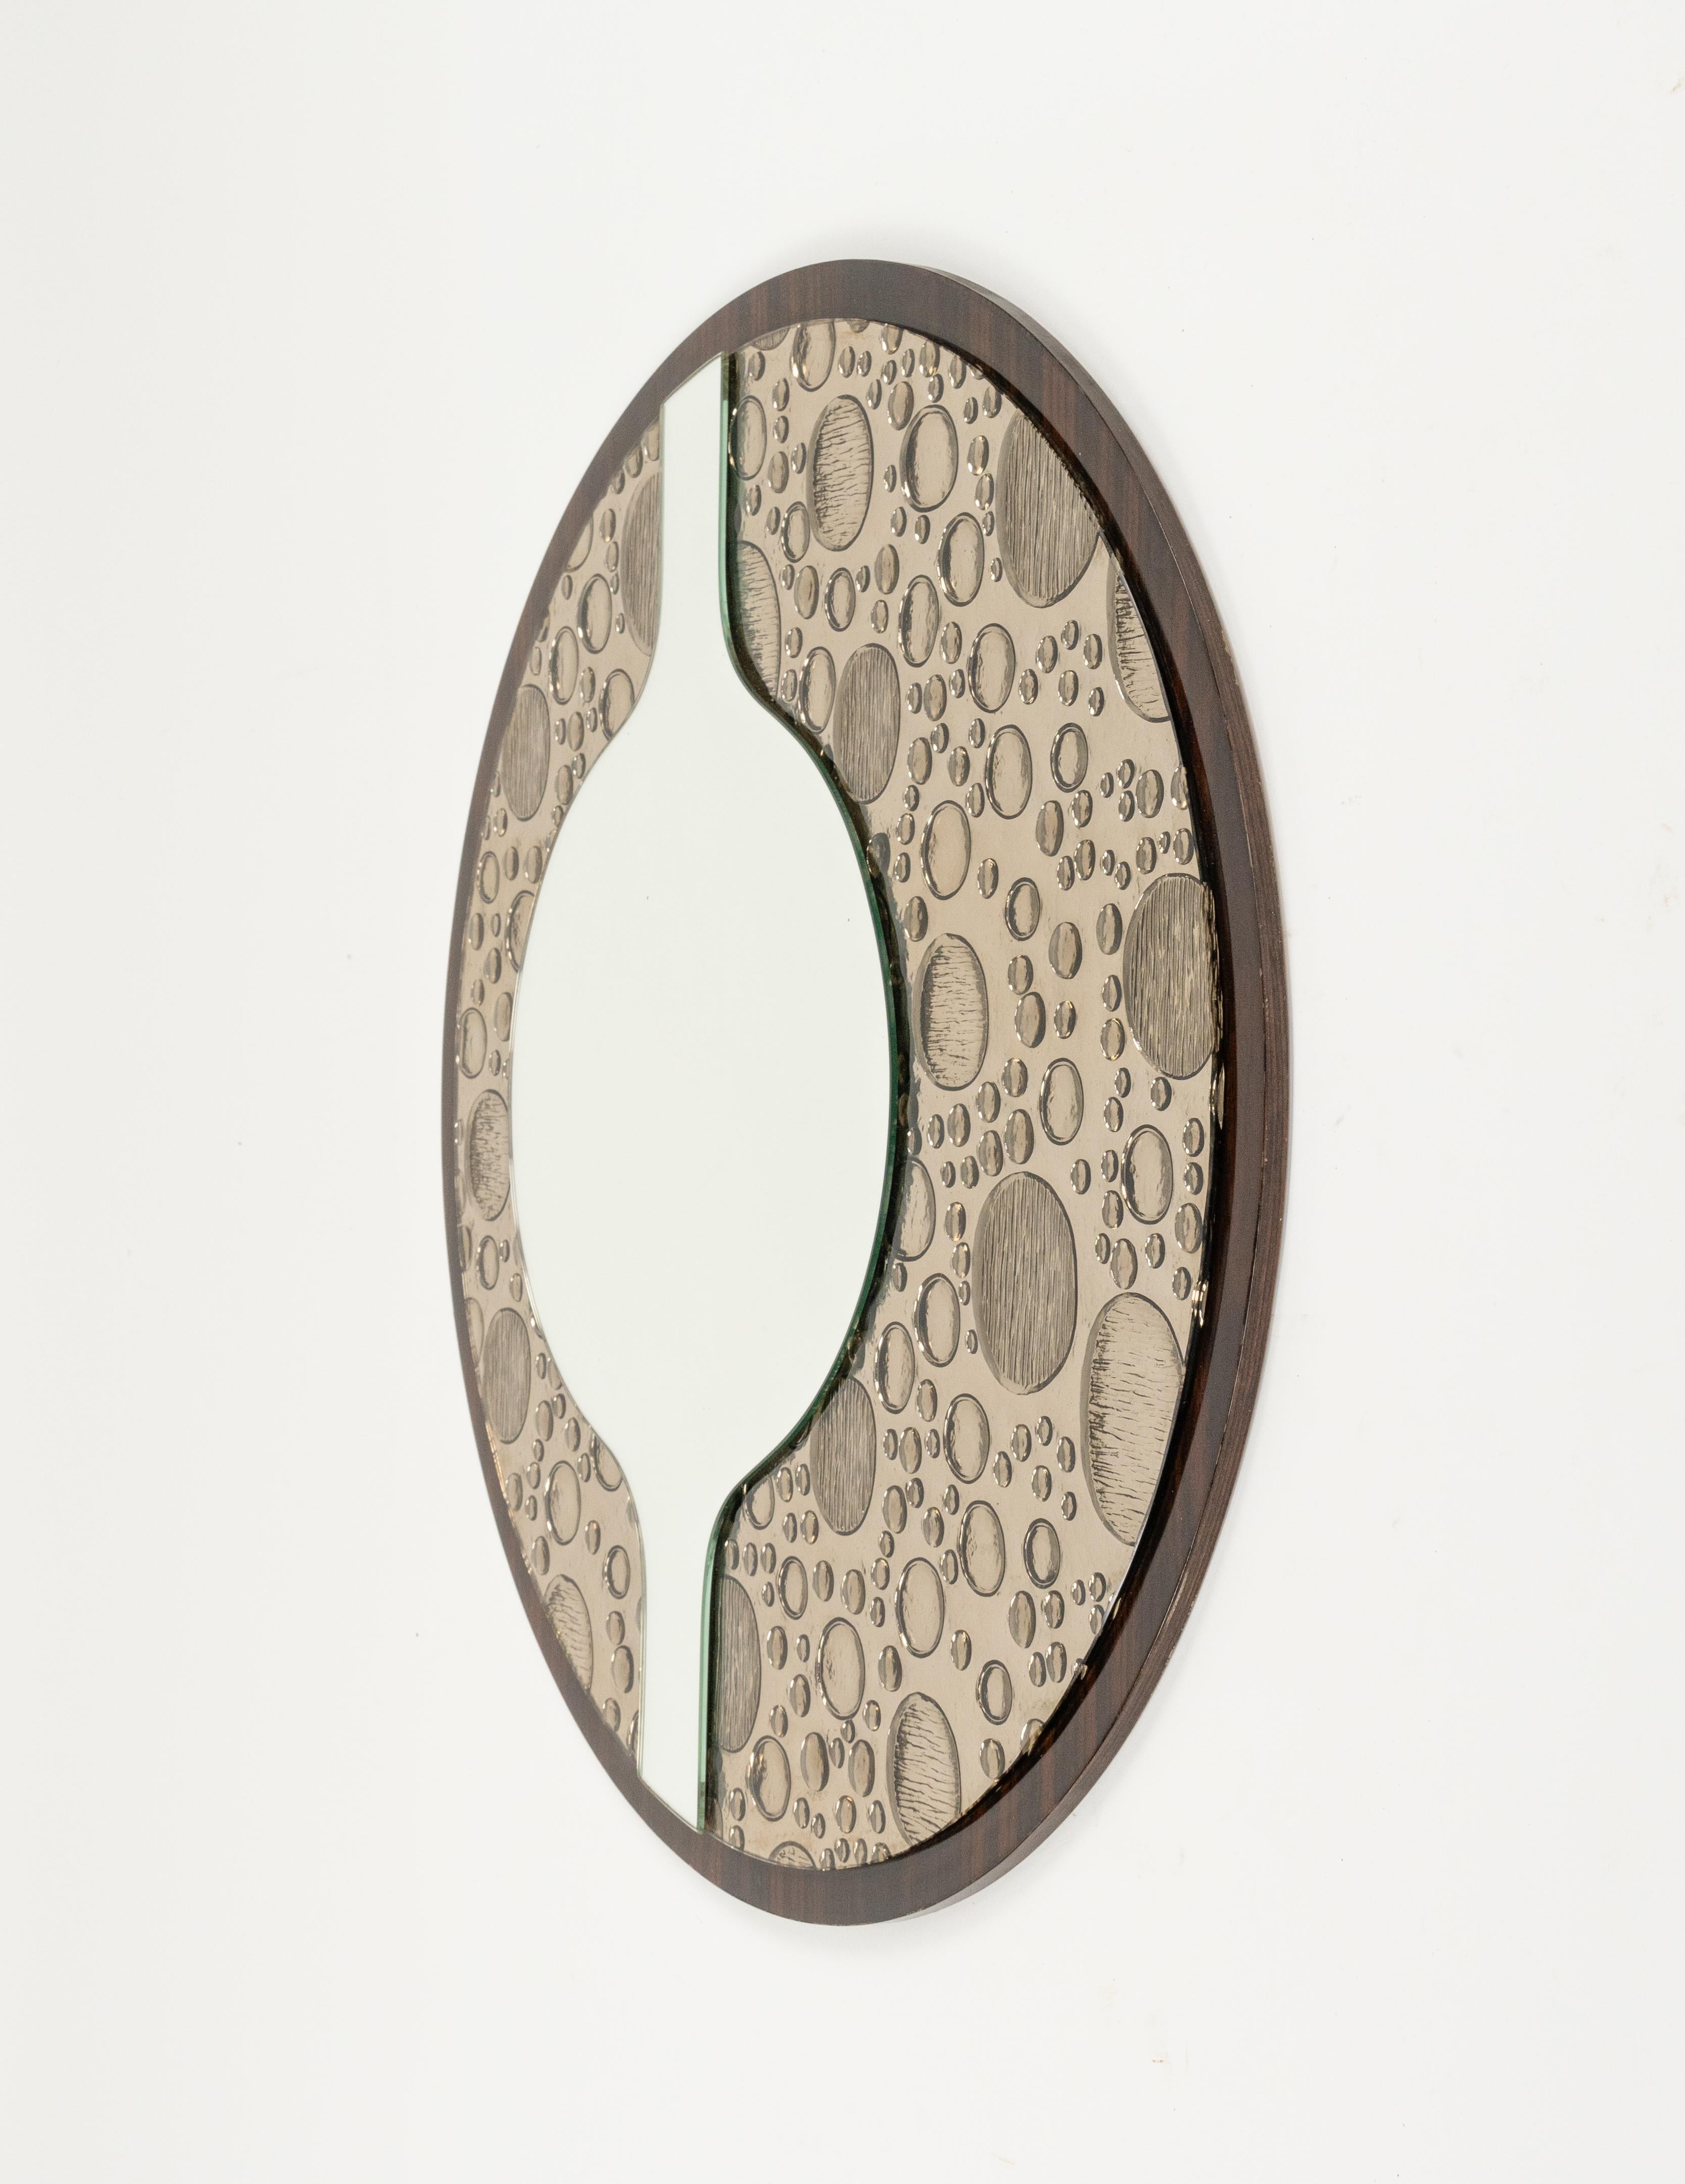 Midcentury Round Wall Mirror in Wood and Glass, Italy 1970s For Sale 4